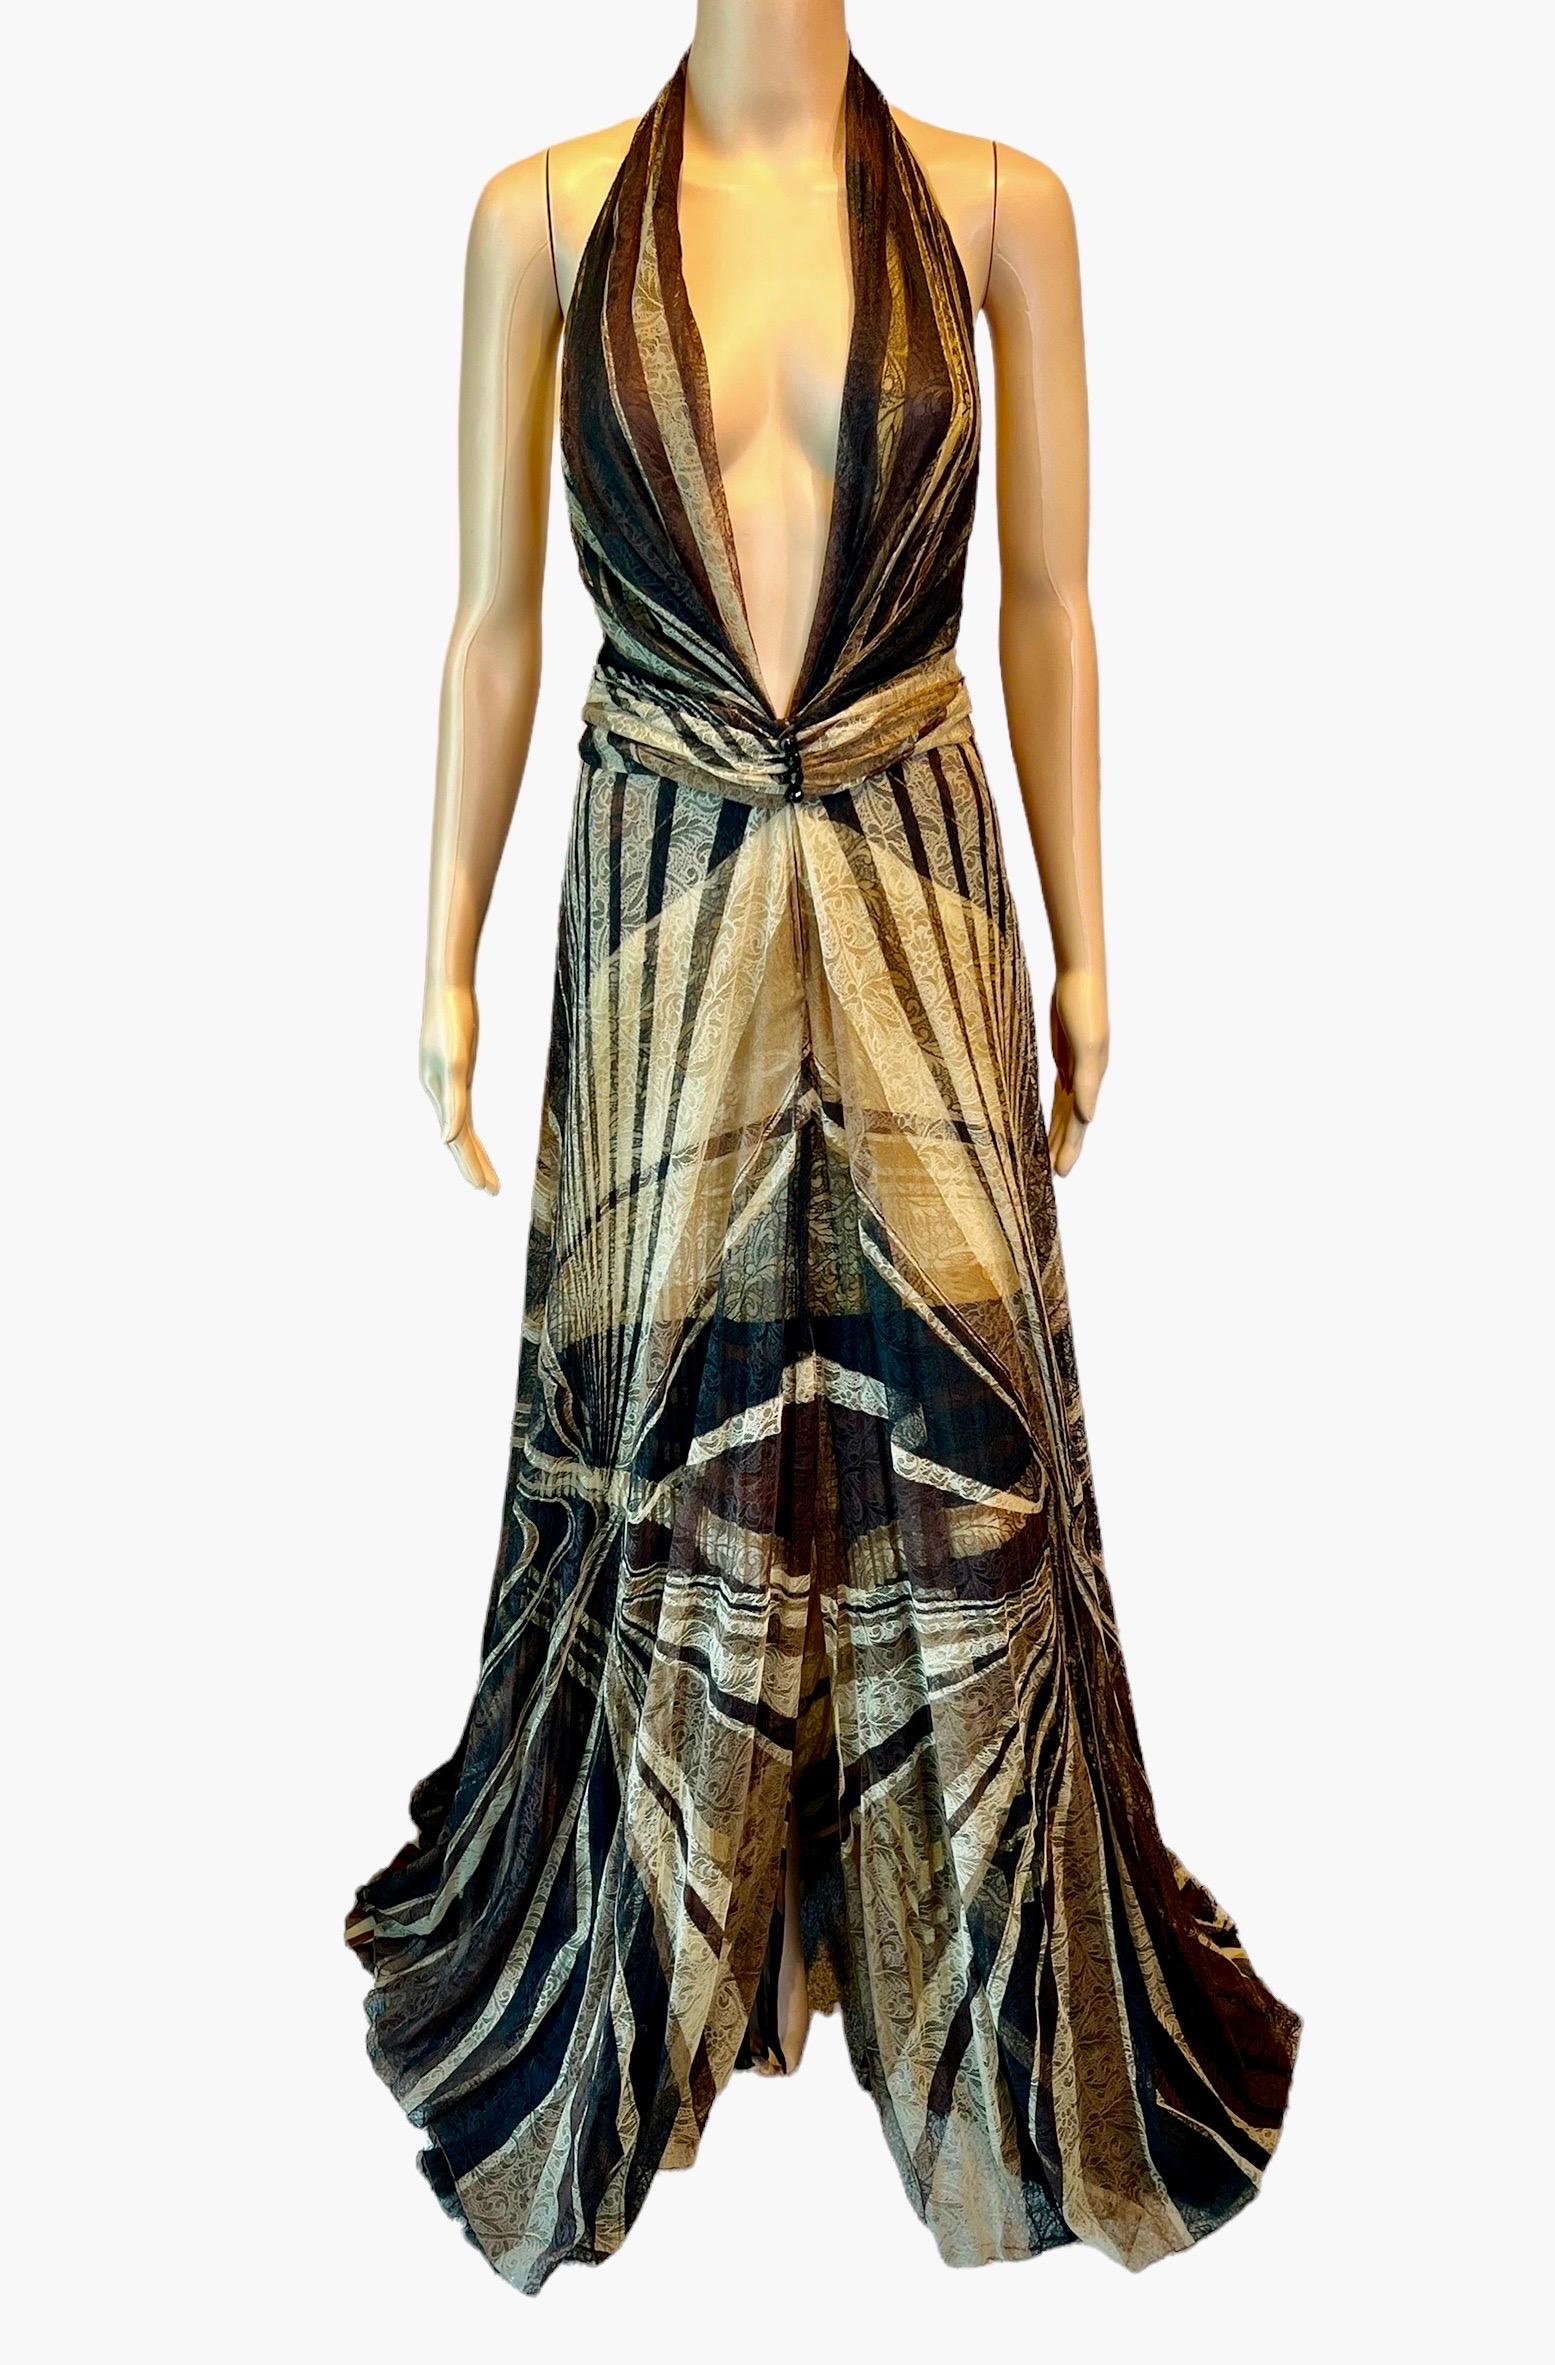 Gianni Versace F/W 2000 Runway Plunging Lace Silk Backless Evening Dress Gown For Sale 1